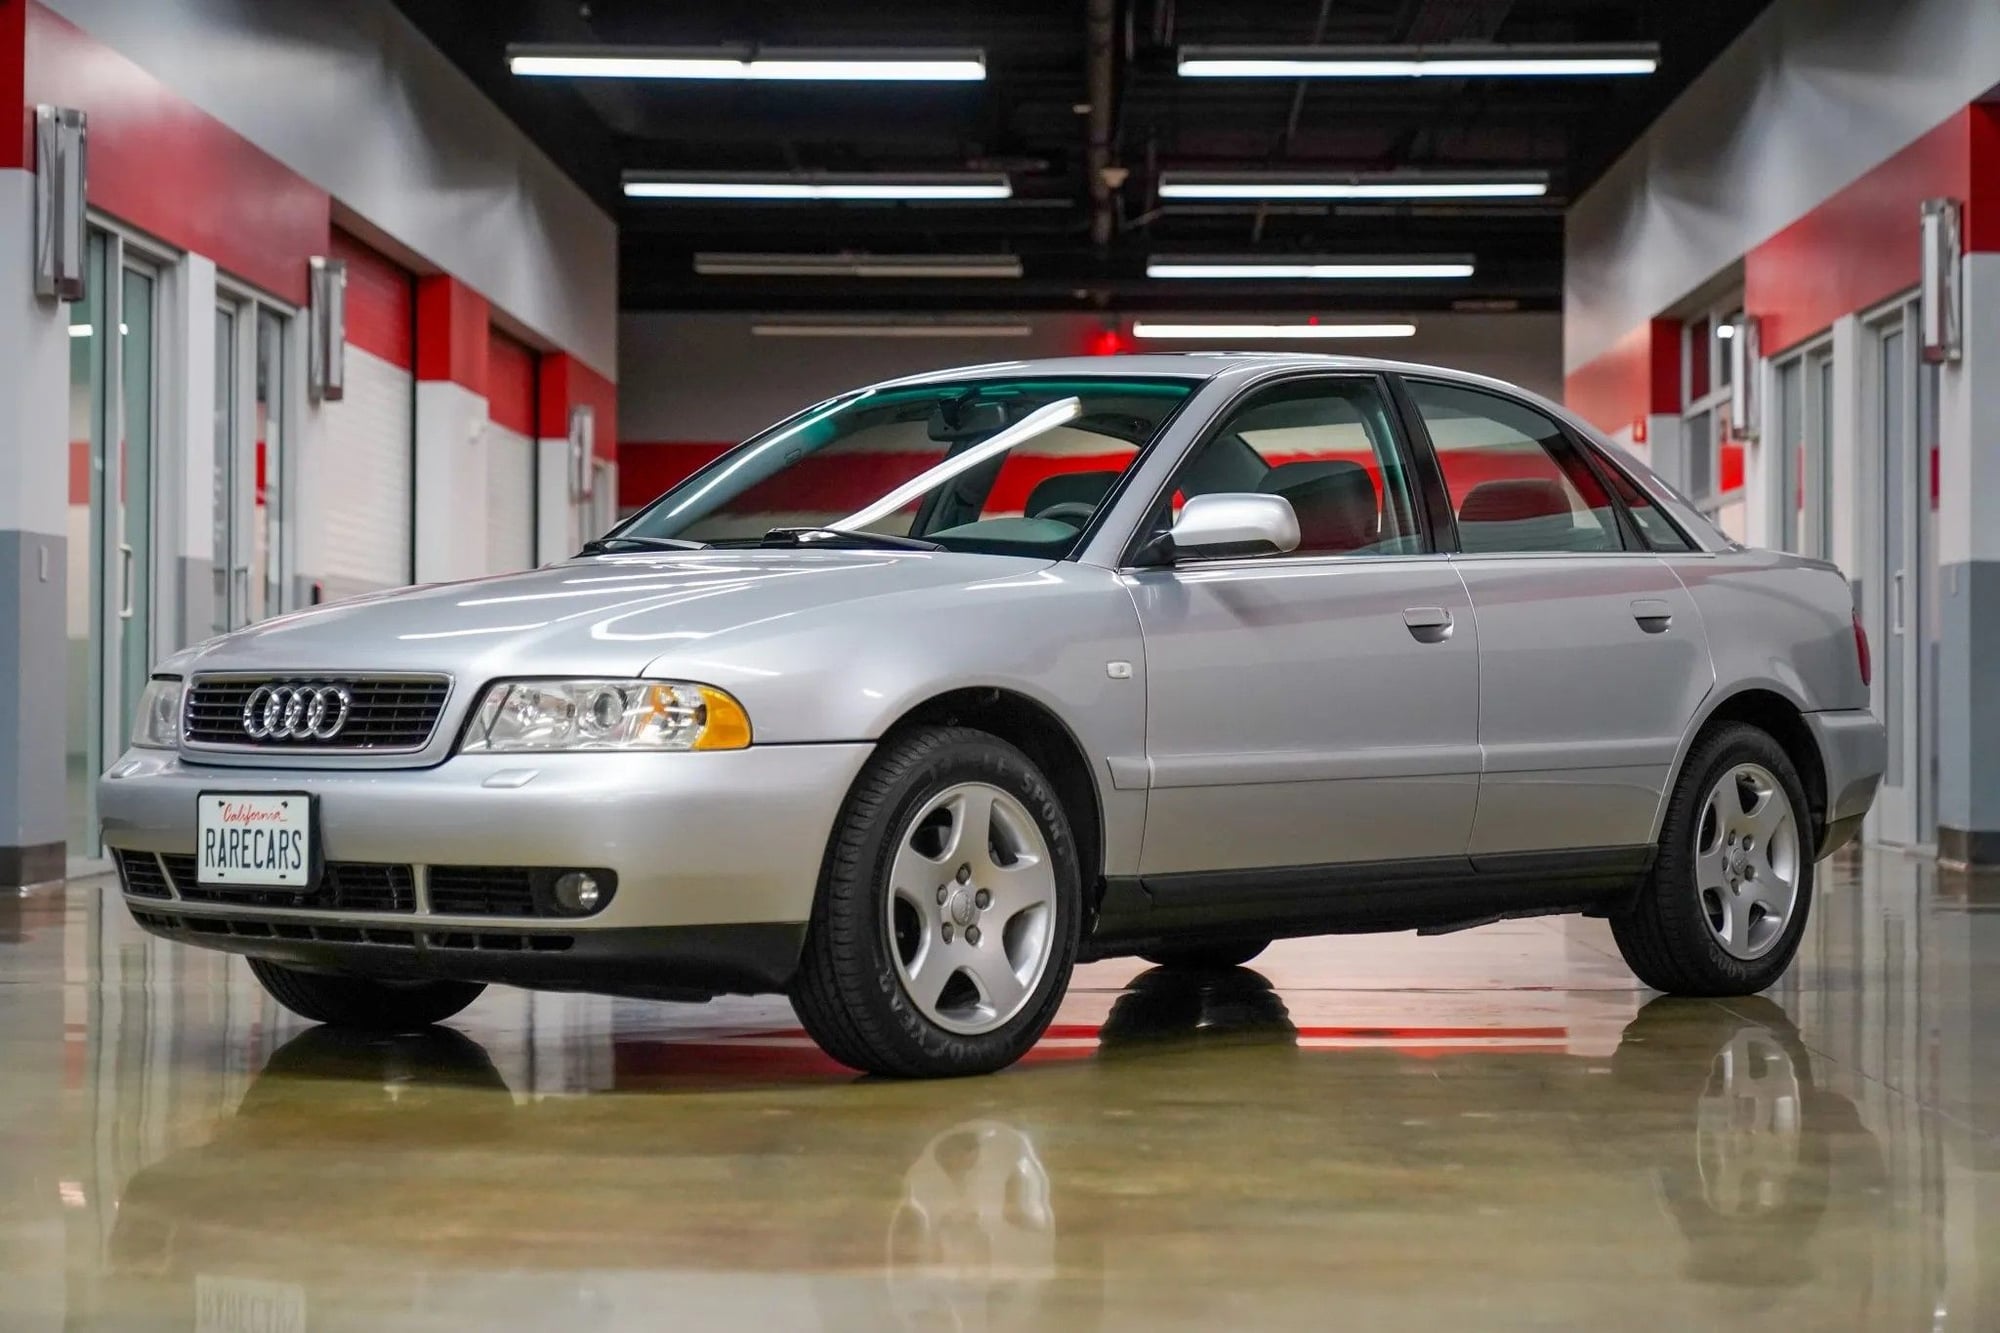 2001 Audi A4 - 2001 Audi A4 2.8 manual with cloth sport seats, no mods, and ultra low miles - Used - VIN WAUDH68D71A036037 - 48,500 Miles - 6 cyl - AWD - Manual - Sedan - Silver - Burlington, VT 05401, United States